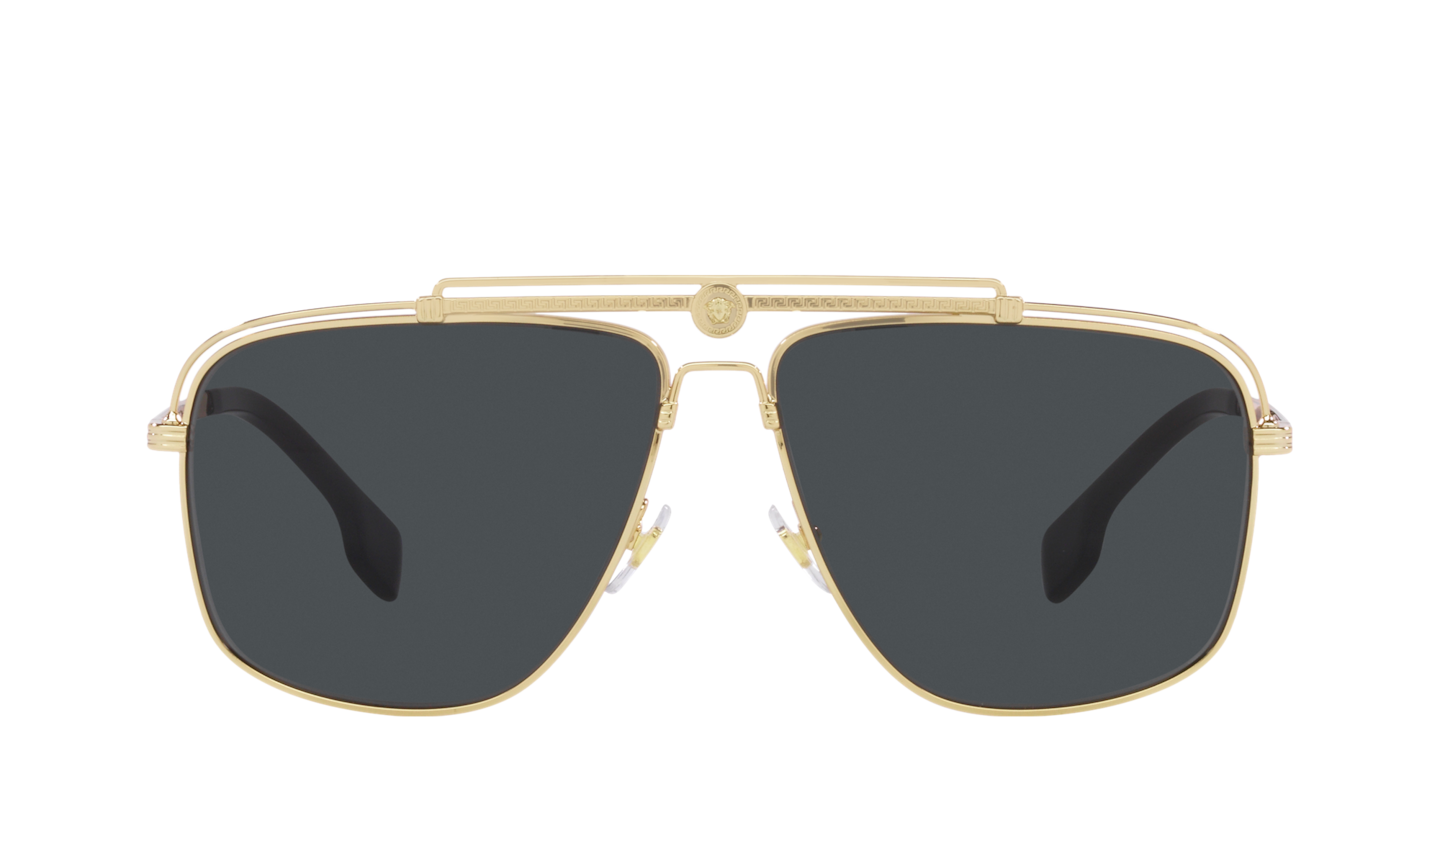 Louis Vuitton Sunglasses  Buy or Sell your LV Sunglasses online